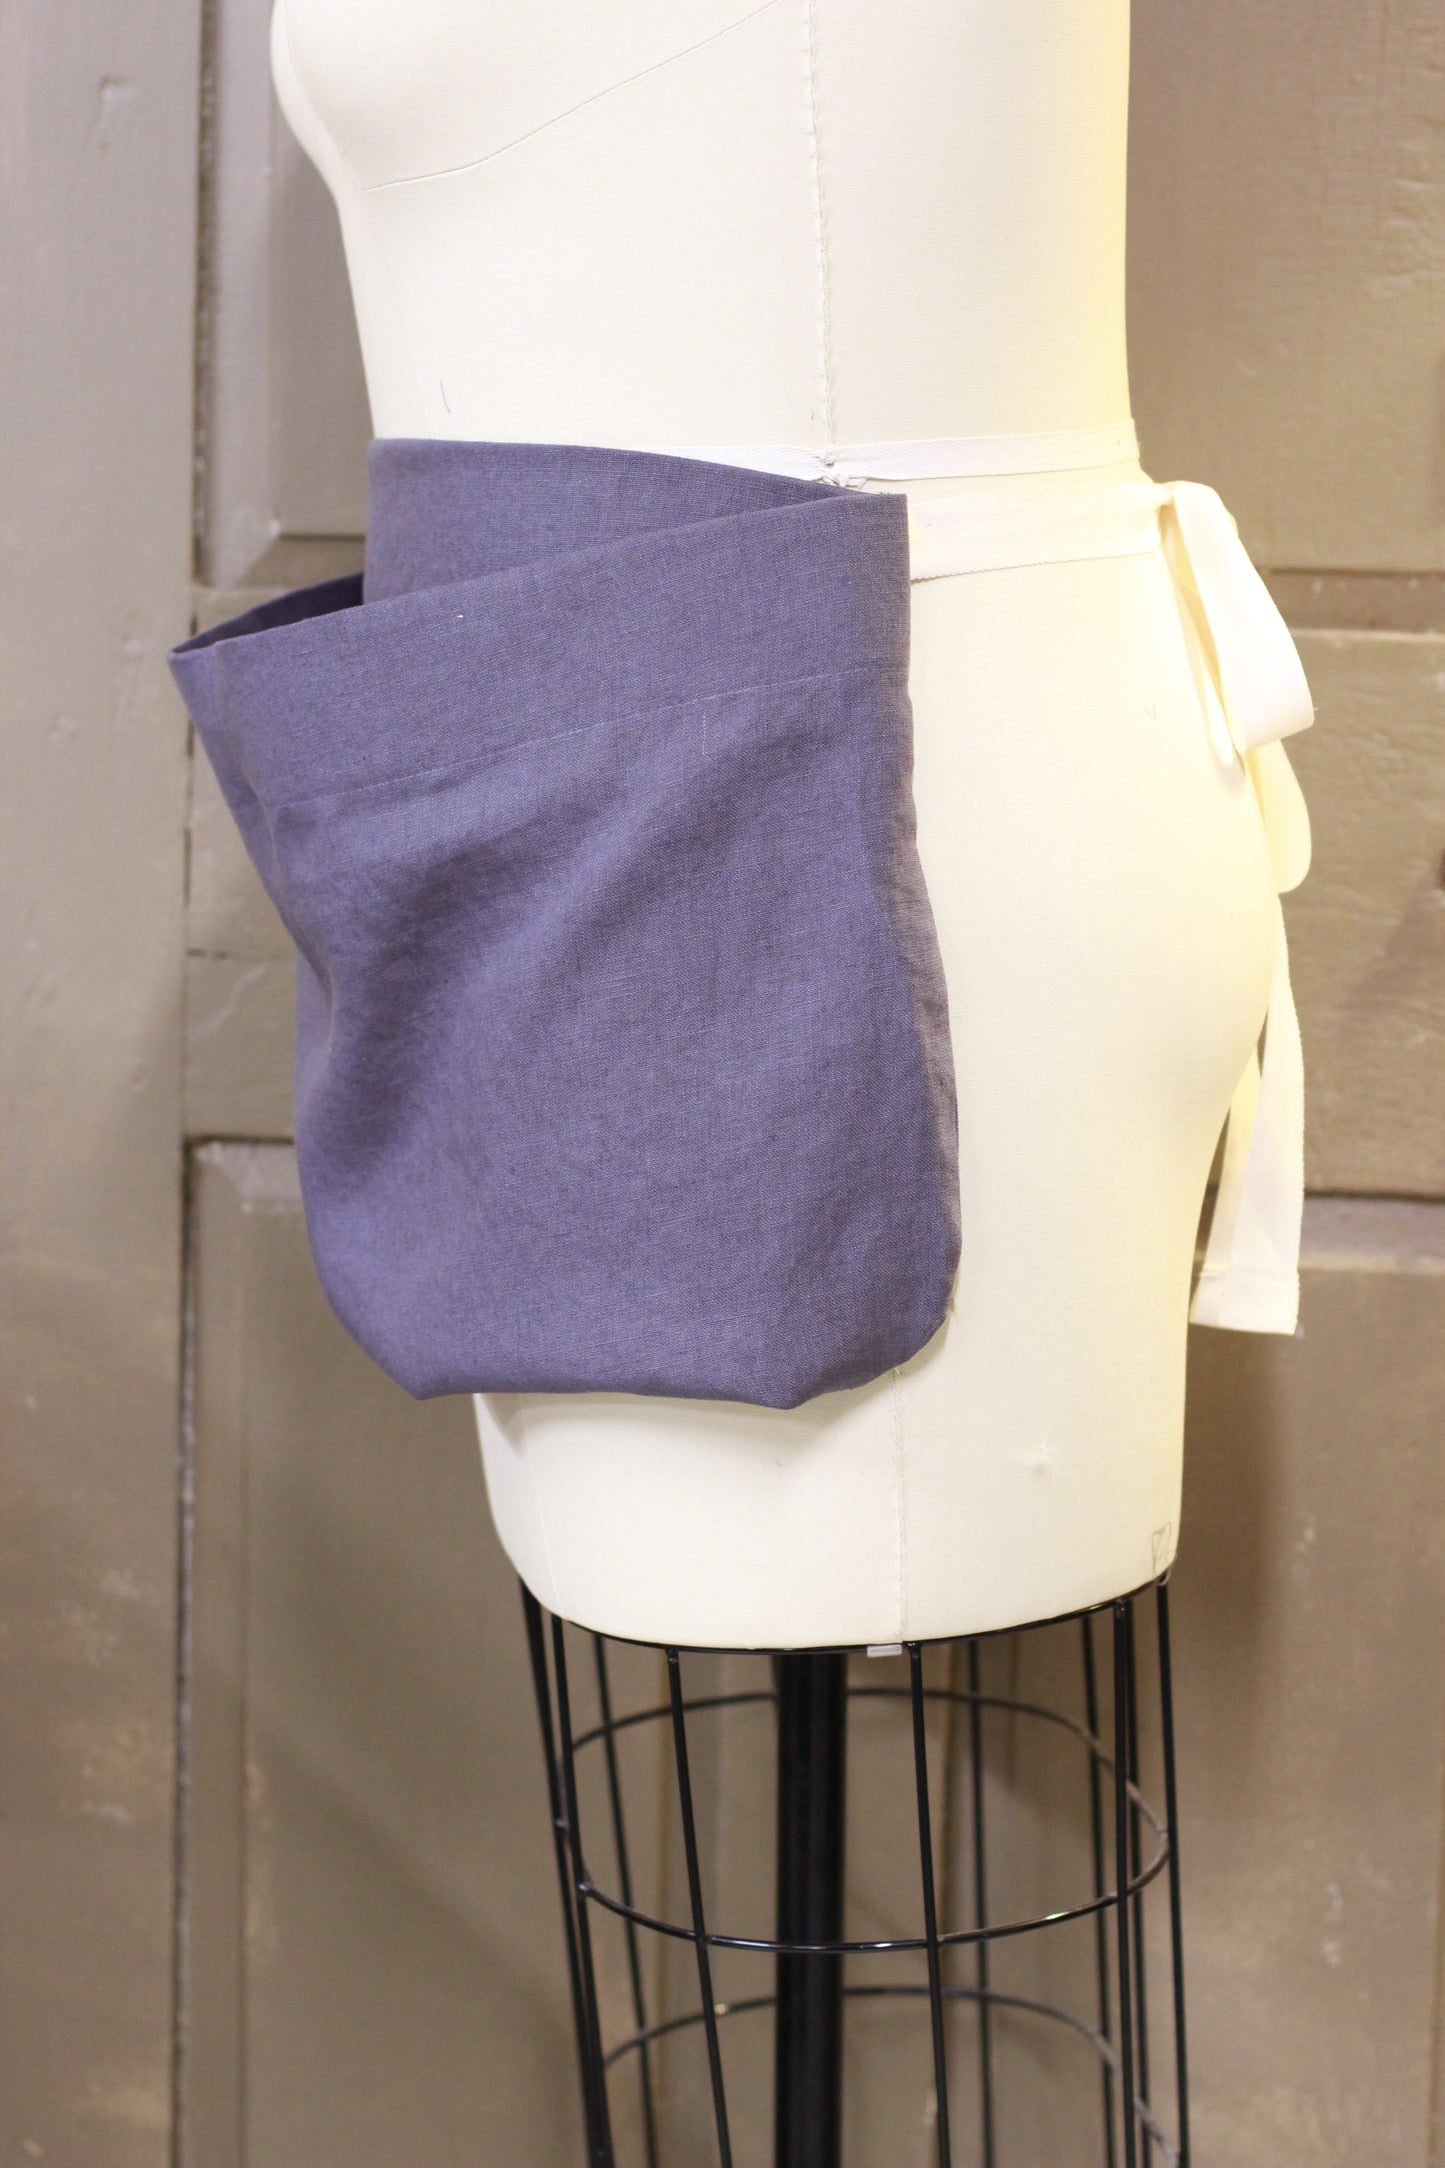 Linen Pouch Apron in Charcoal Grey Linen